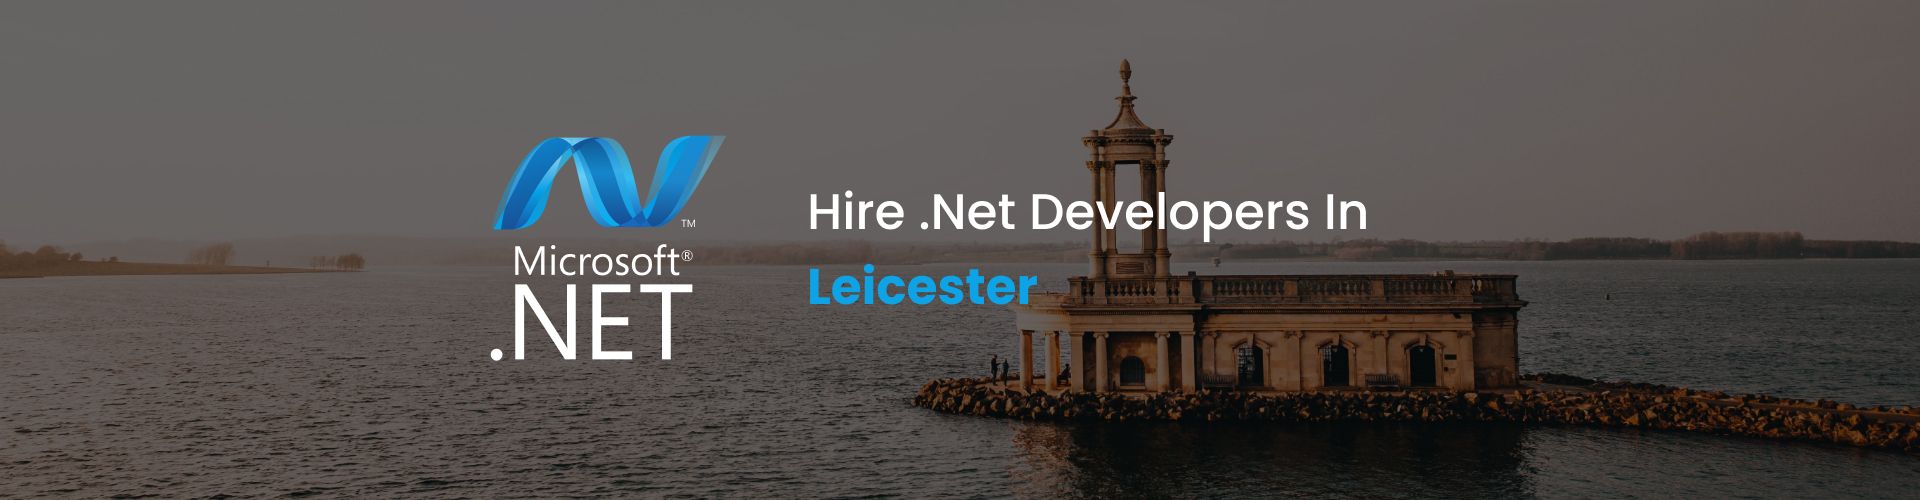 hire dot net developers in leicester